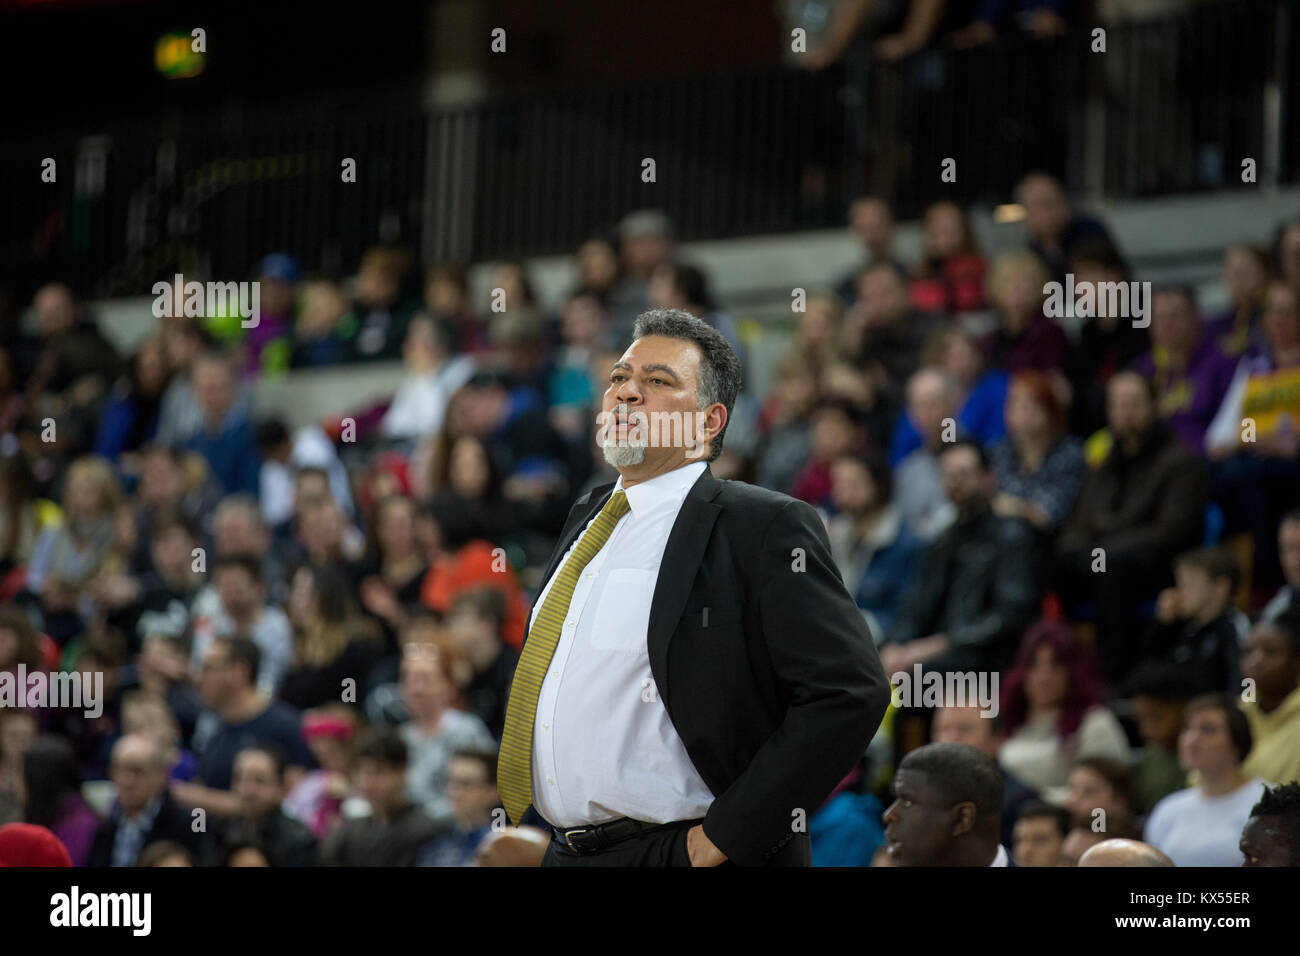 Copper Box Arena, London, UK, 7th Jan 2018.  London Lions v Sheffield Sharks British Basketball League game in the Copper Box Arena at the Queen Elizabeth Olympic Park in London. Lions' coach vince Macaulay. Lions win 81 - 73. copyright Carol Moir/AlamyLiveNews Stock Photo